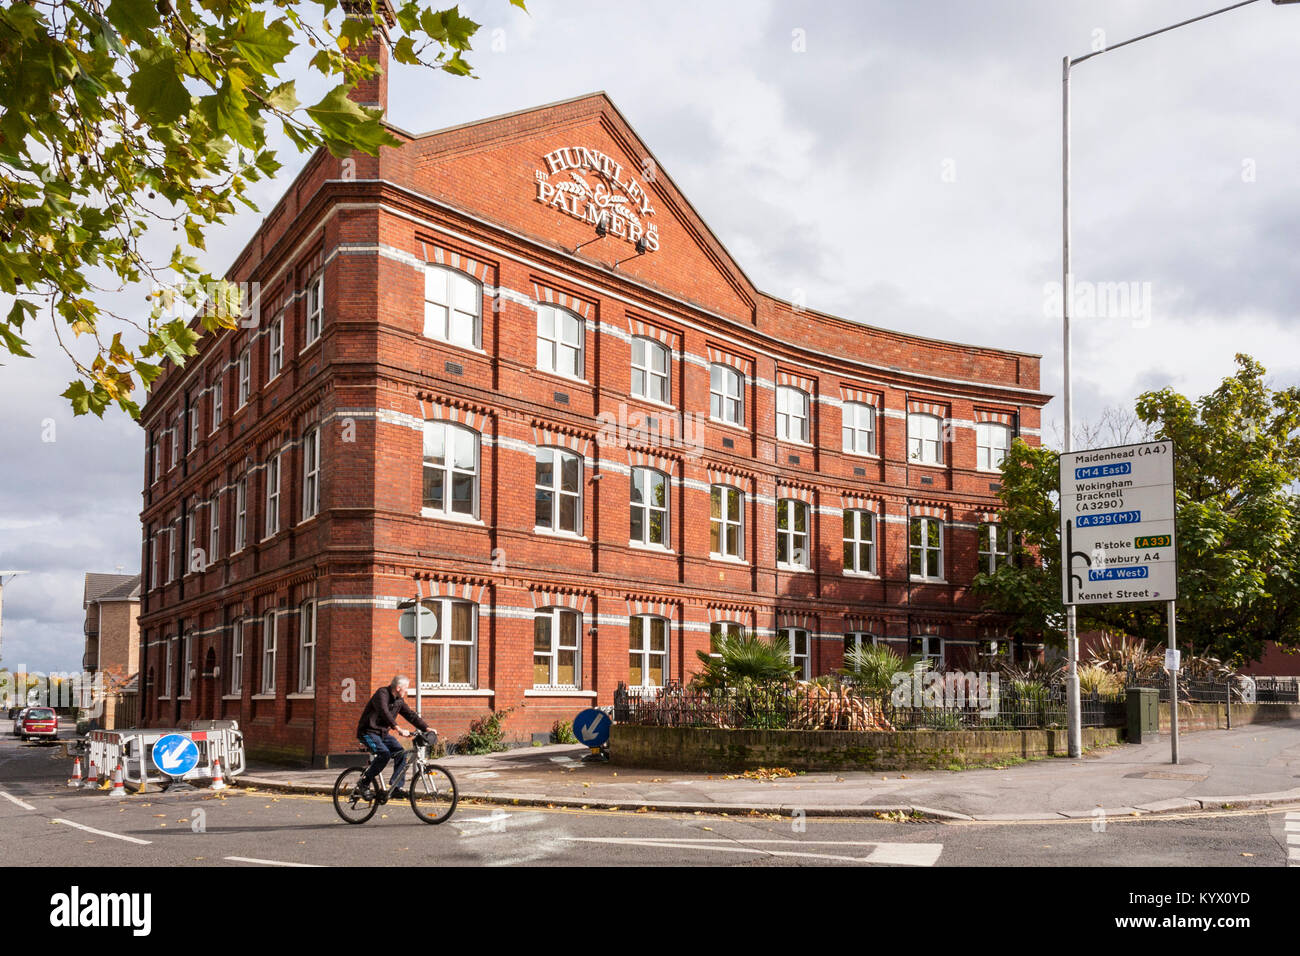 Huntley and Palmers building, Reading, Berkshire, England, GB, UK Stock Photo